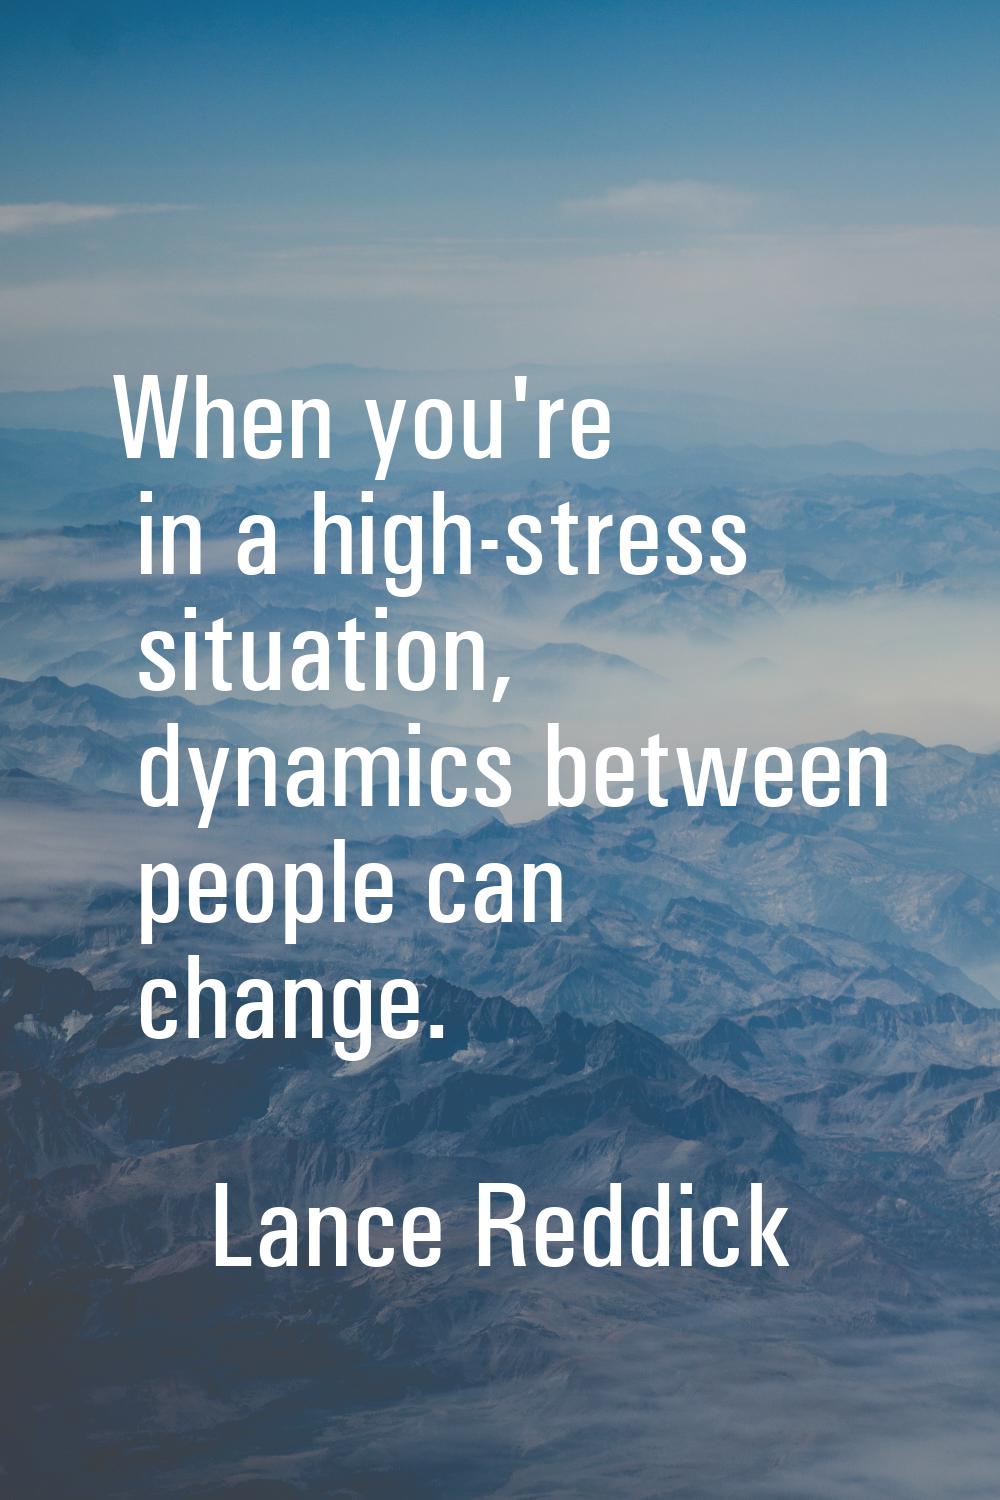 When you're in a high-stress situation, dynamics between people can change.